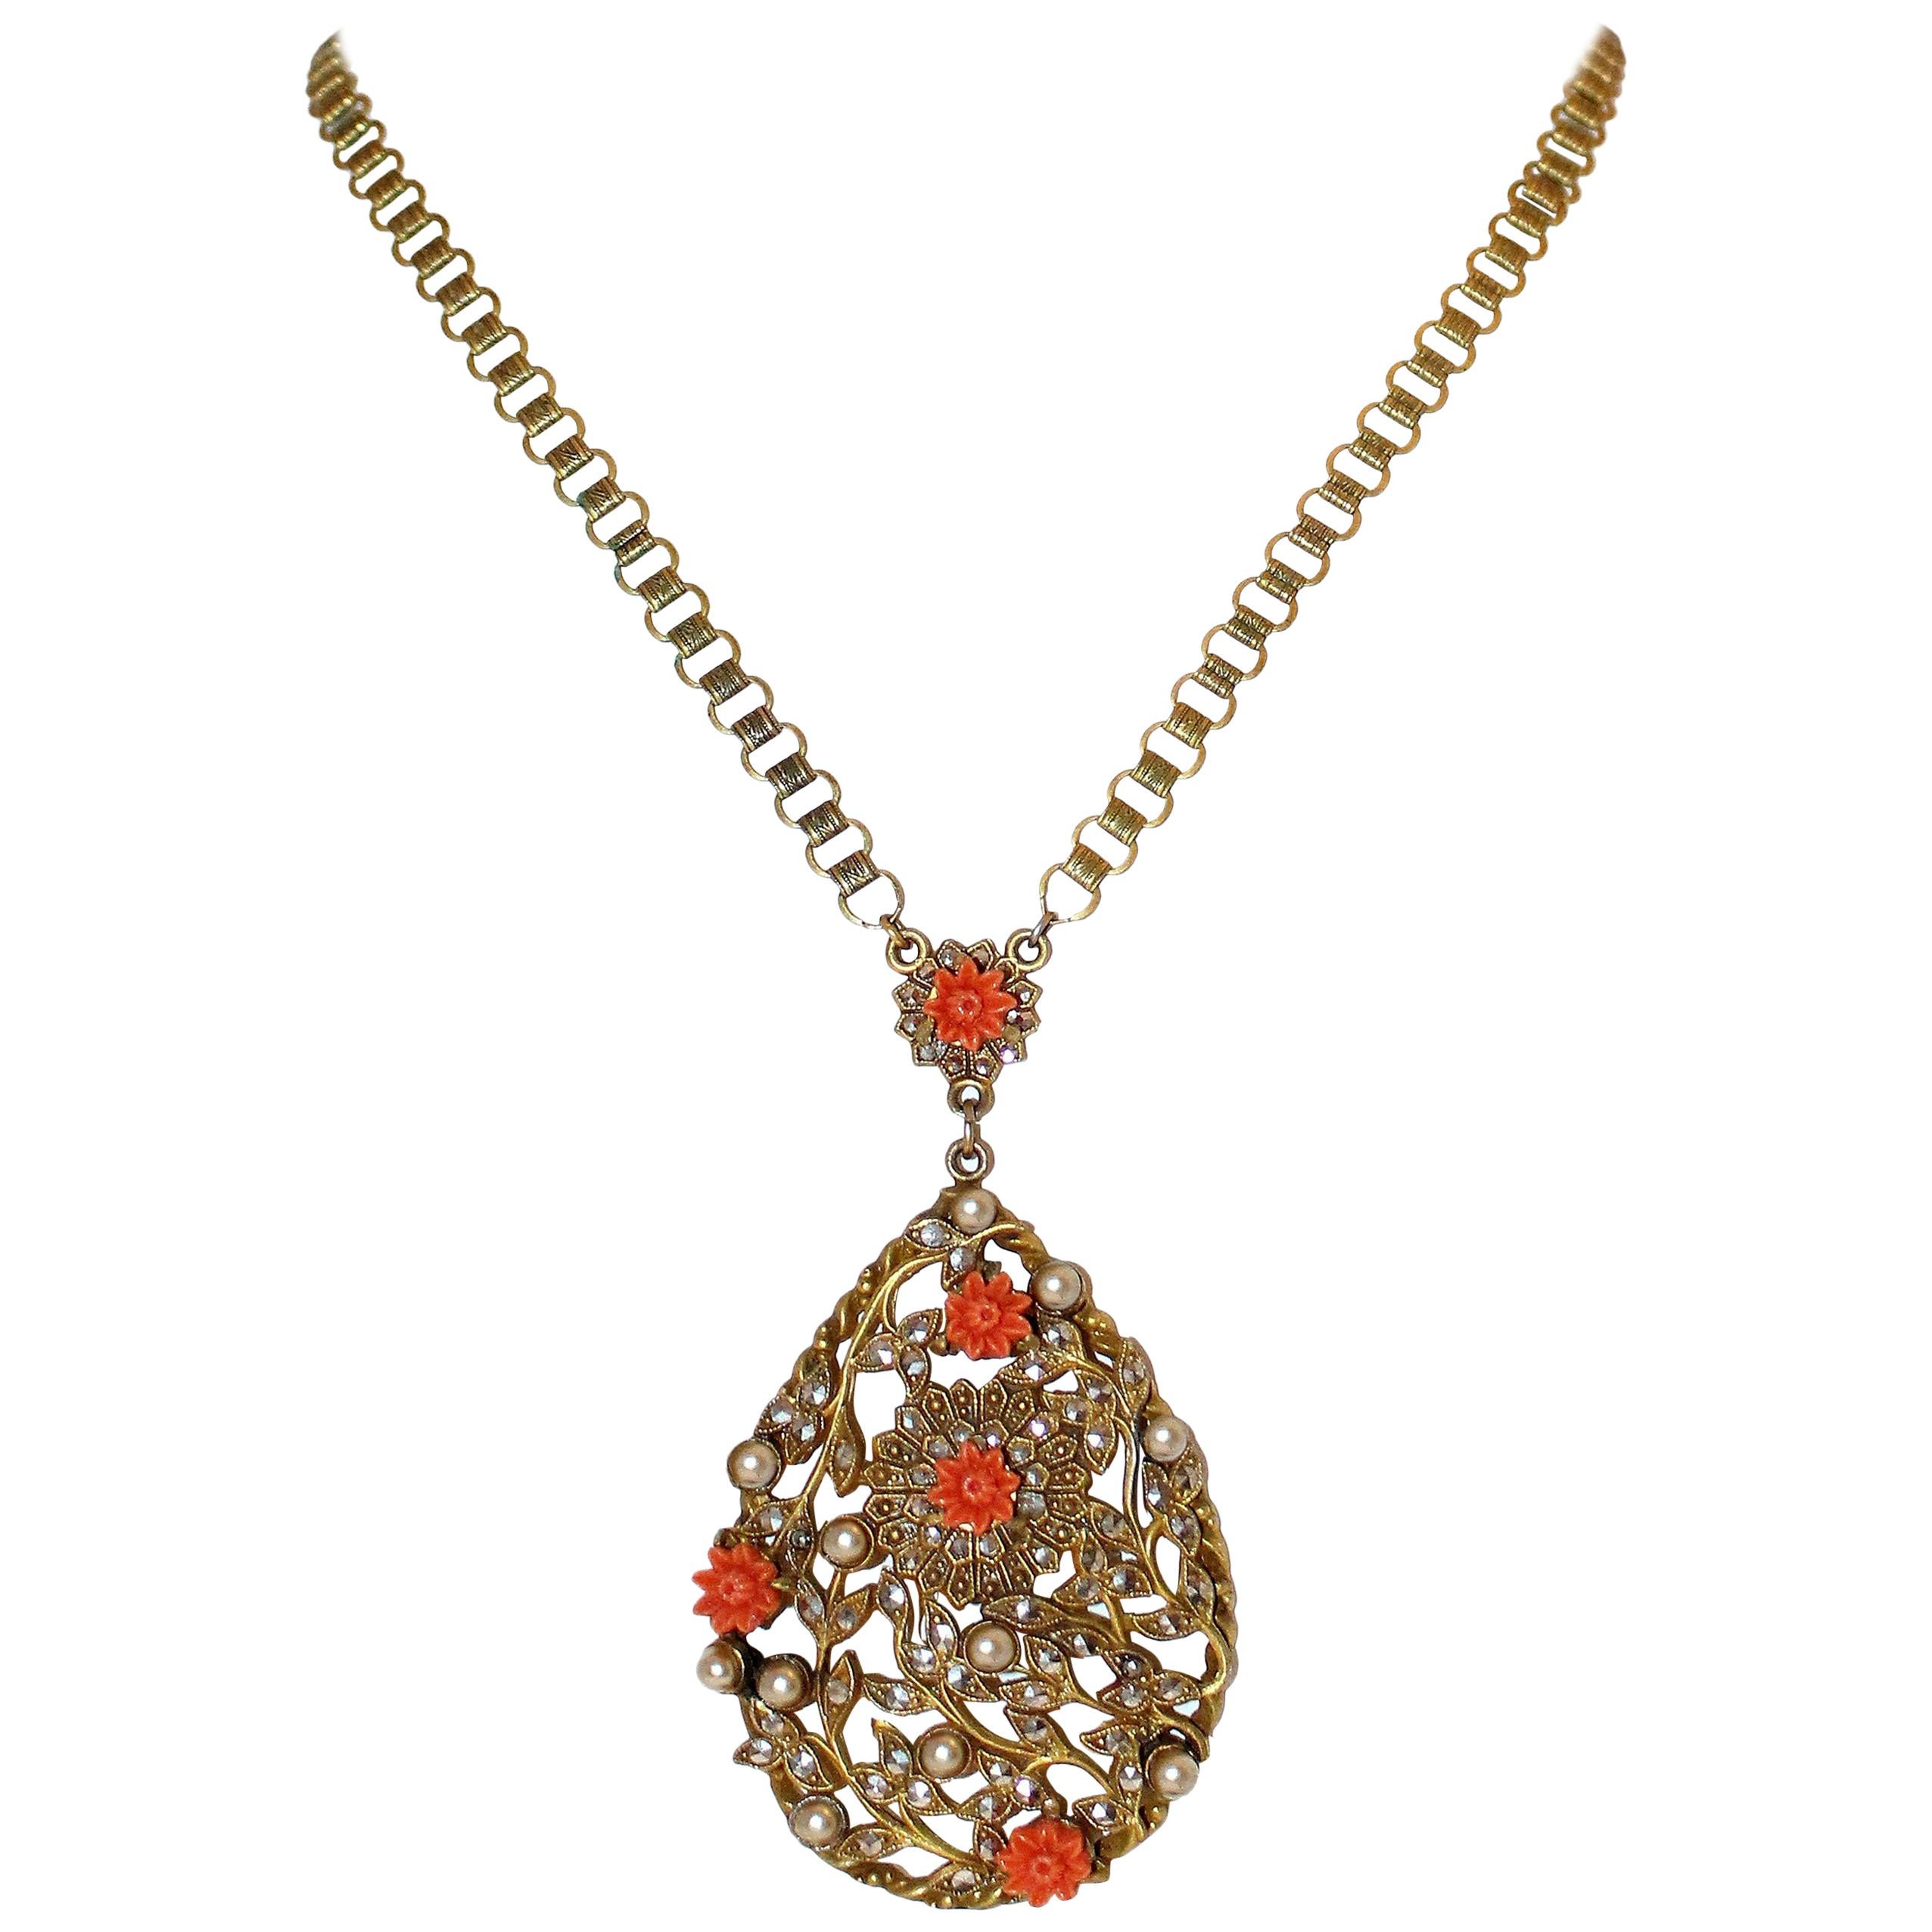 Circa 1930 Book-Chain Necklace With Jeweled Pendant For Sale at 1stDibs